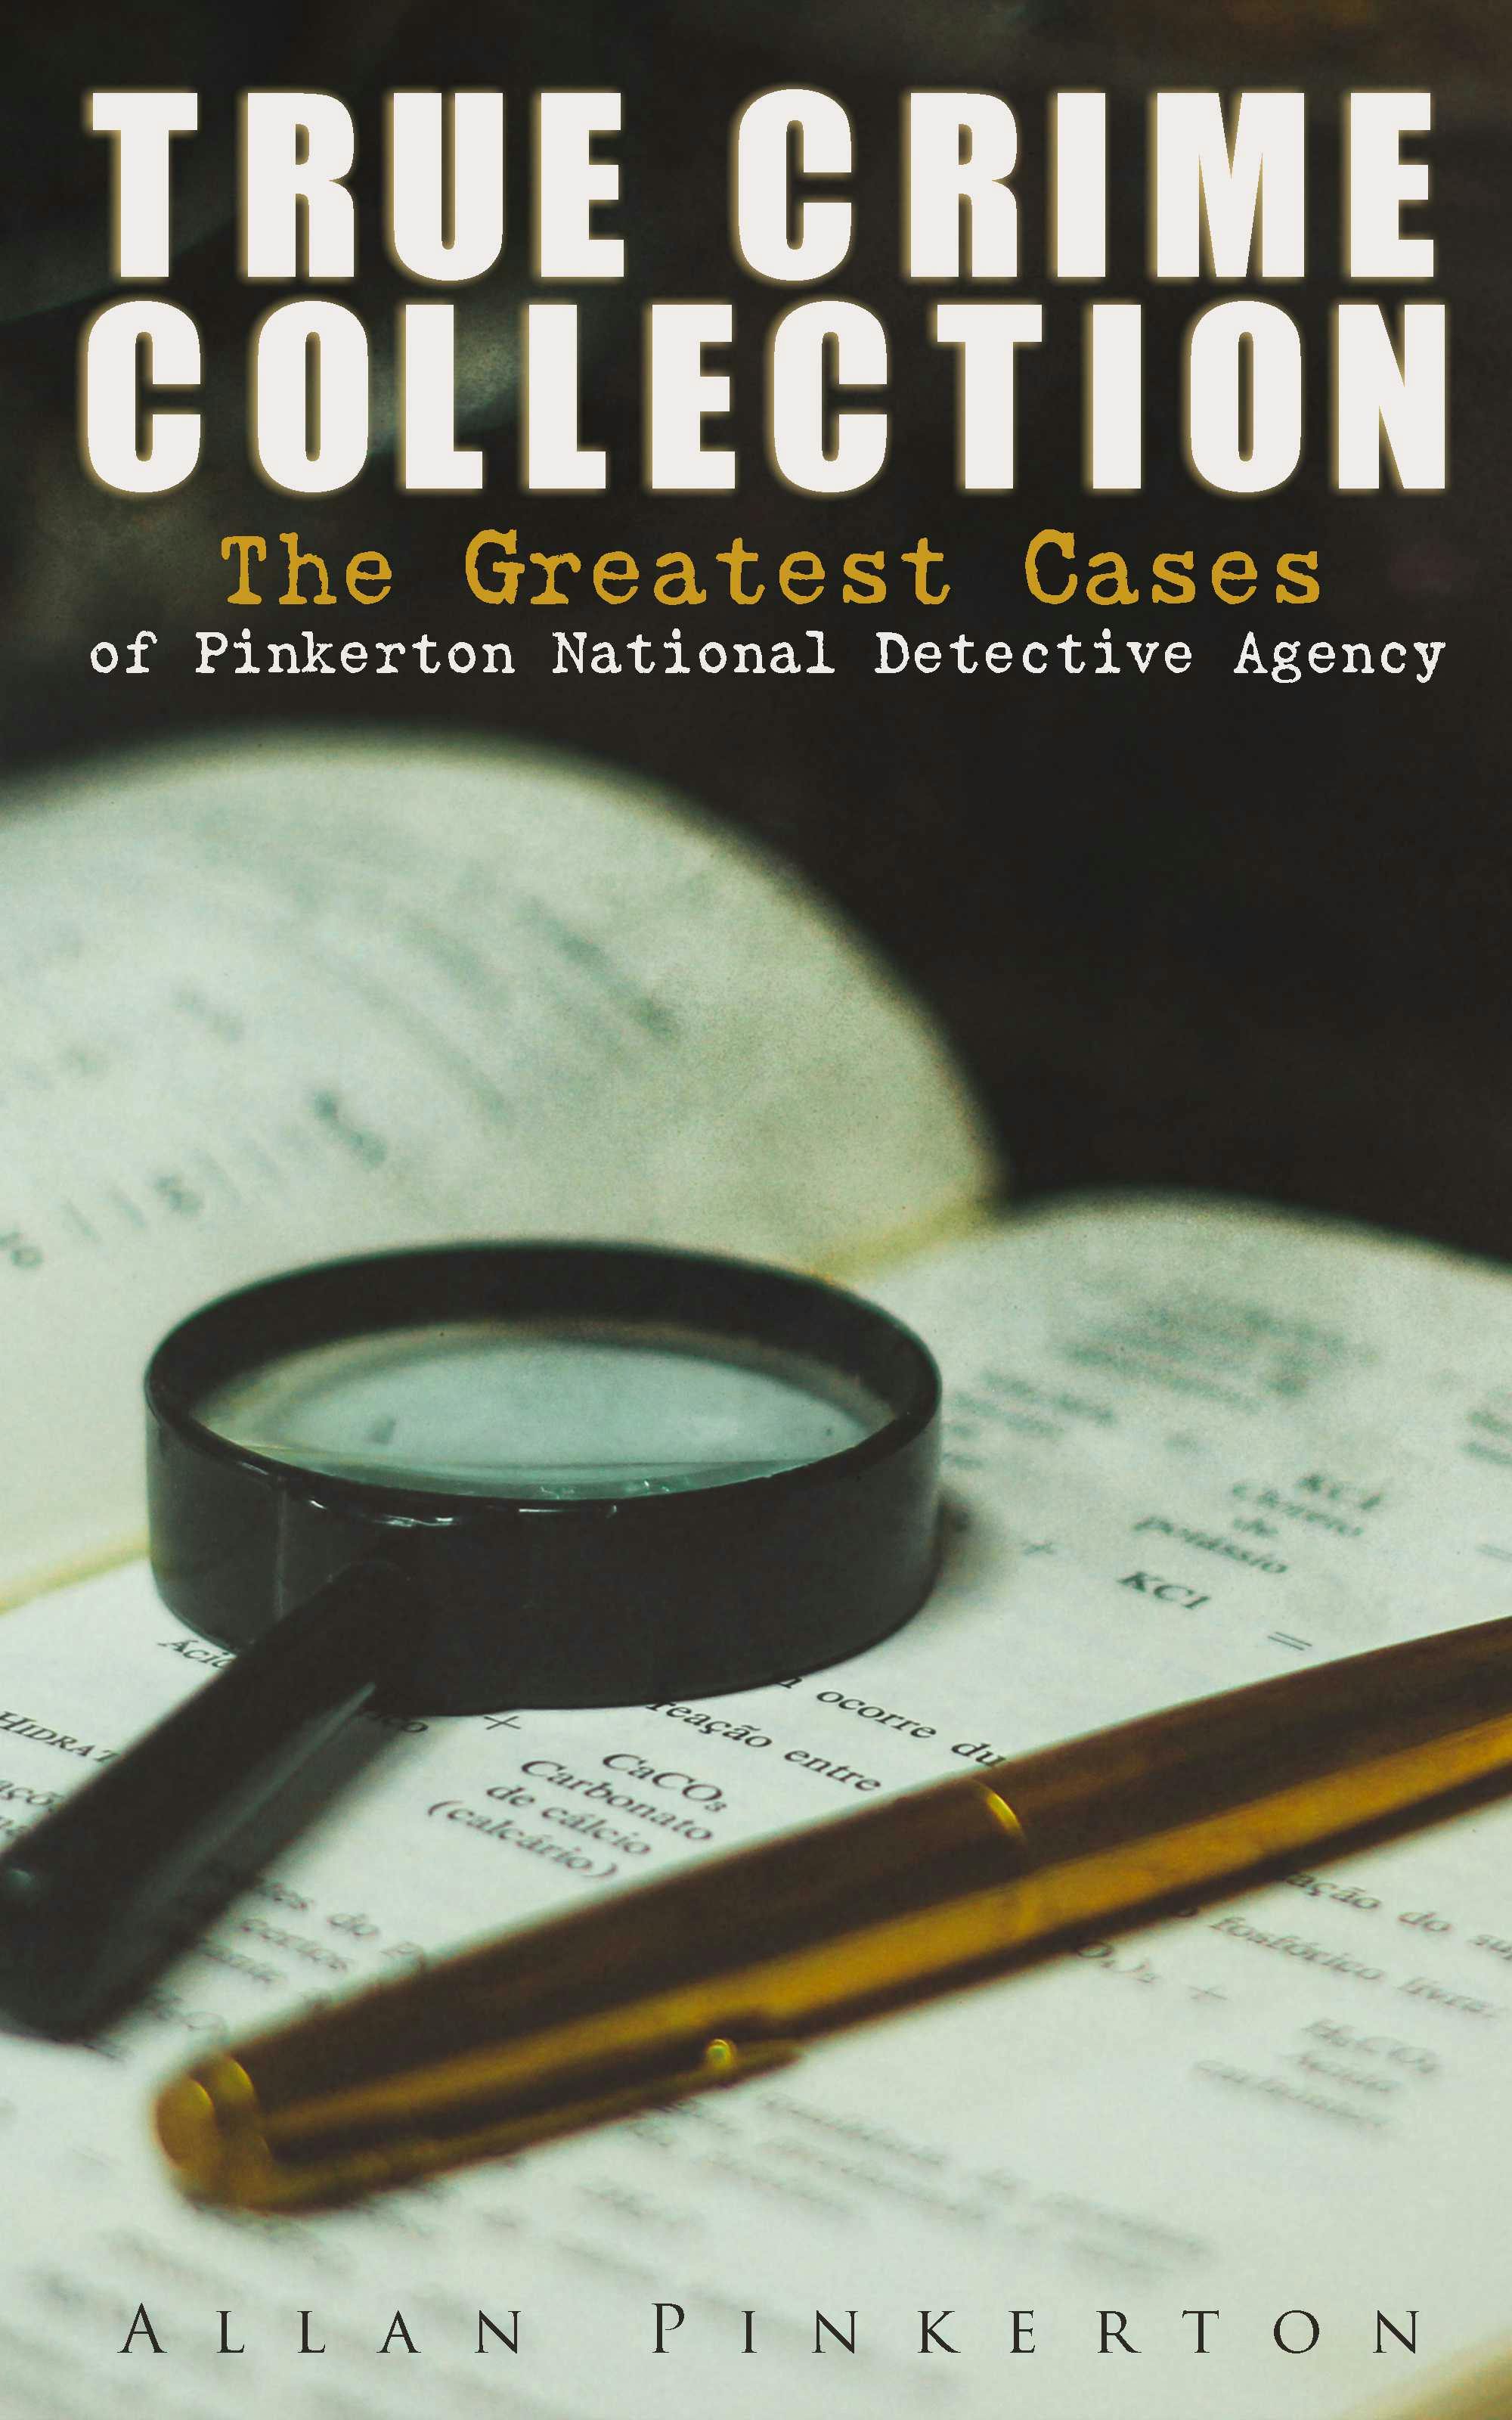 TRUE CRIME COLLECTION: The Greatest Cases of Pinkerton National Detective Agency: The Expressman and the Detective, The Somnambulist and the Detective, The Murderer and the Fortune Teller, Poisoner and the Detectives, Bucholz and the Detectives, Don Pedro and the Detectives… - Allan Pinkerton